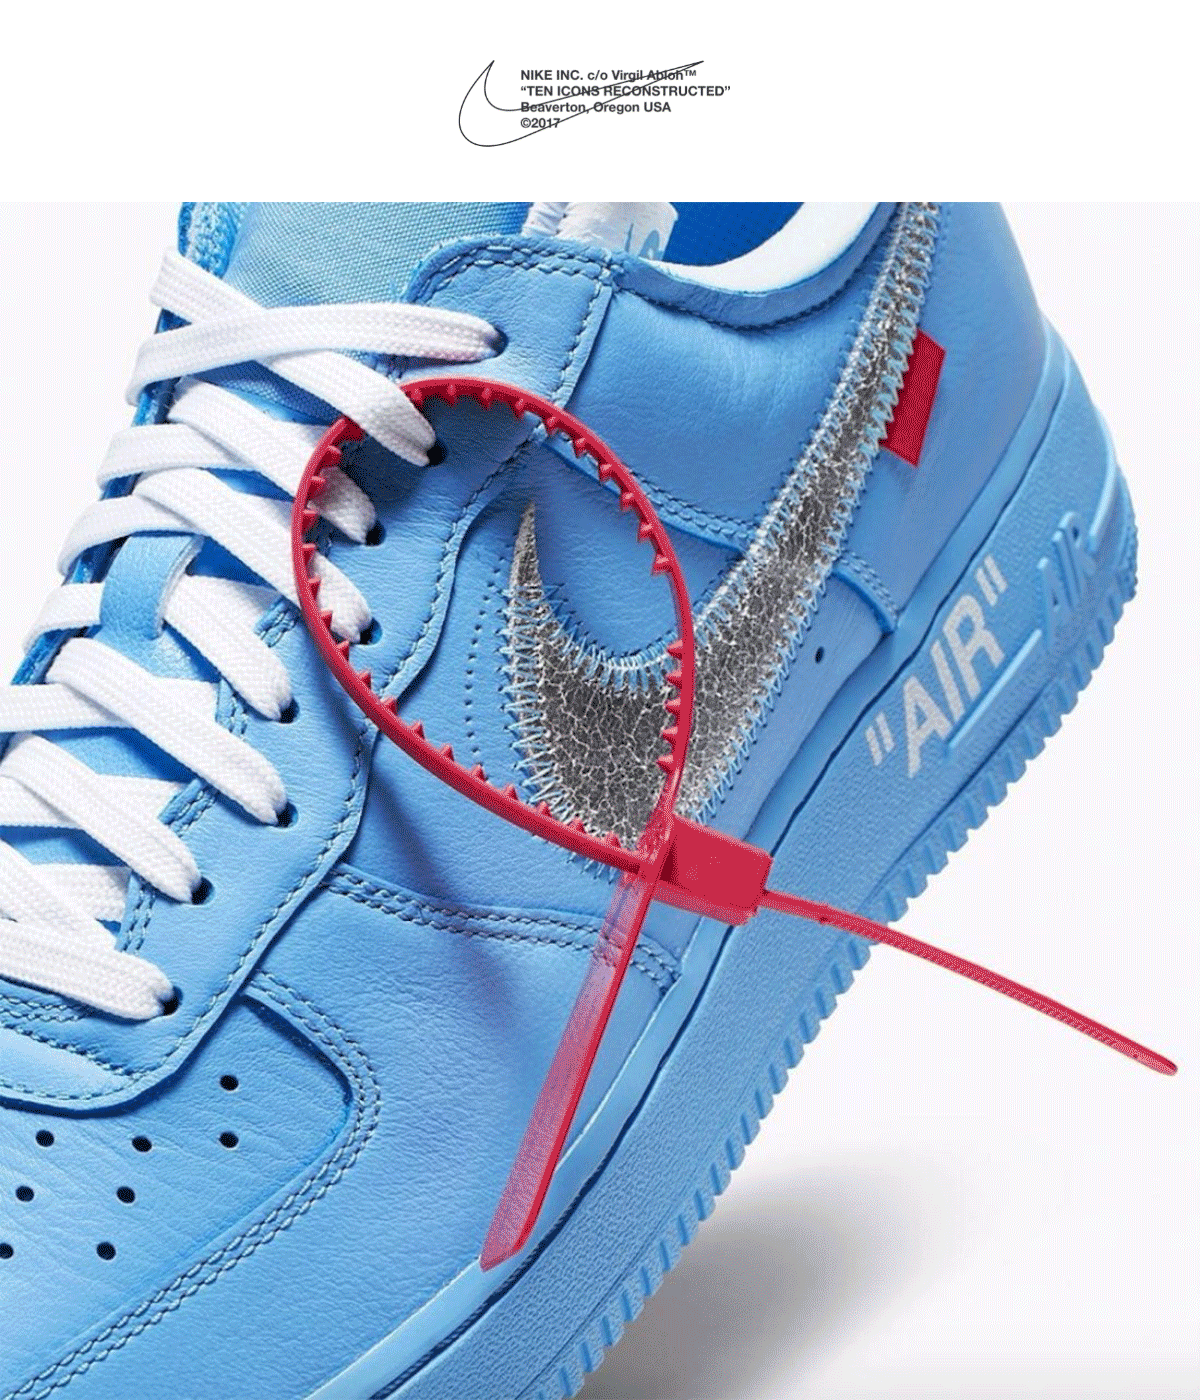 klekt.in: 🛫 The Most Exclusive Off-White x Yet: The Air Force 1 'MCA' is now available. | Milled